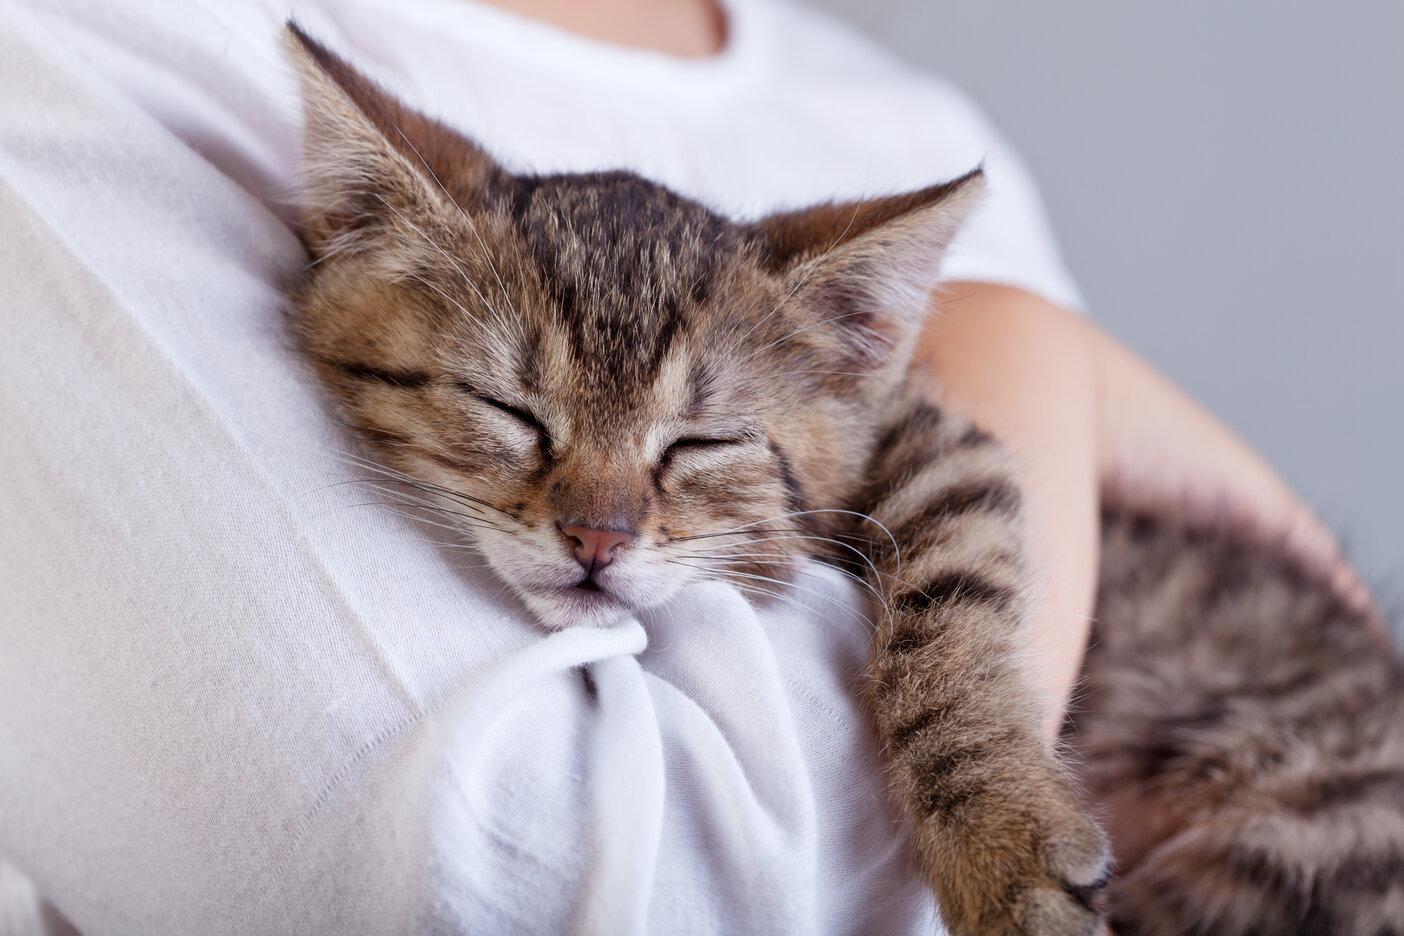 Adorable kitten in a hugging posture, exhibiting affectionate behavior and showcasing a heartwarming bond.